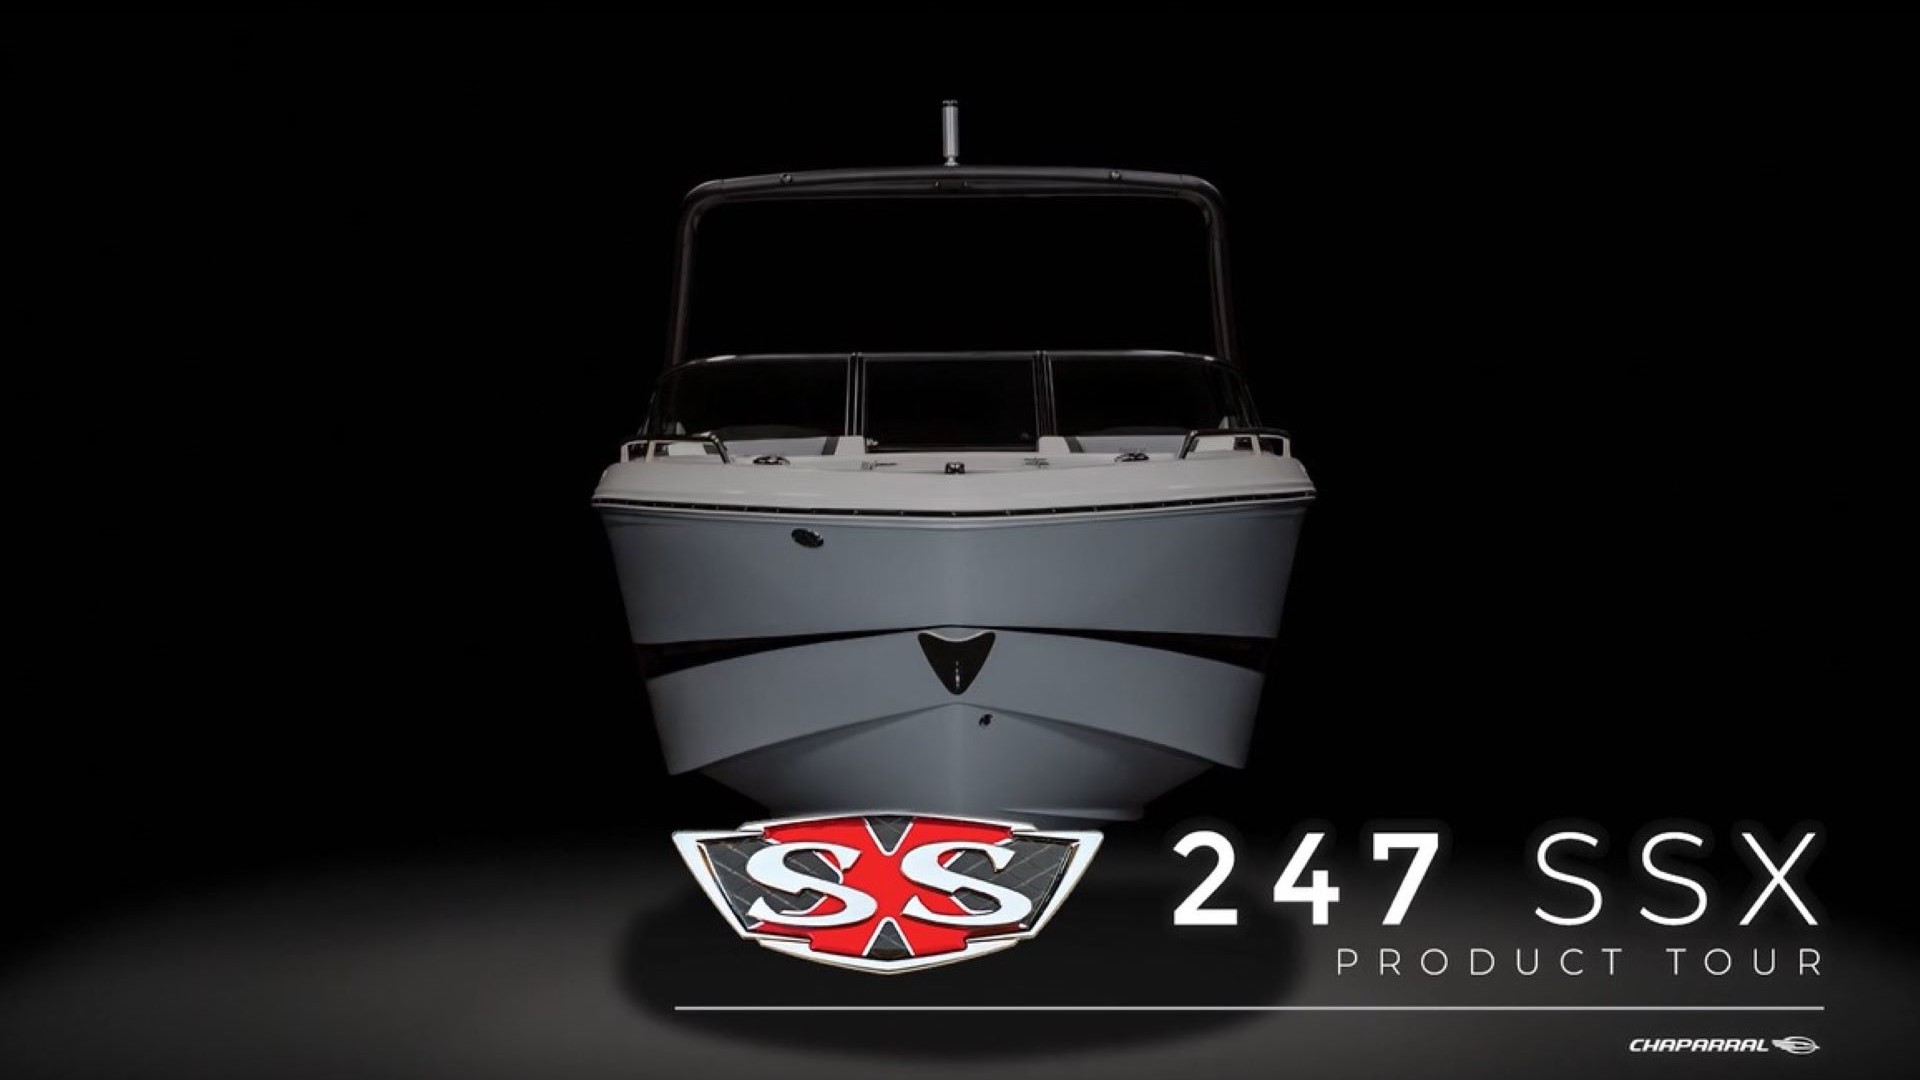 247 SSX - BoatTest.com (2021)